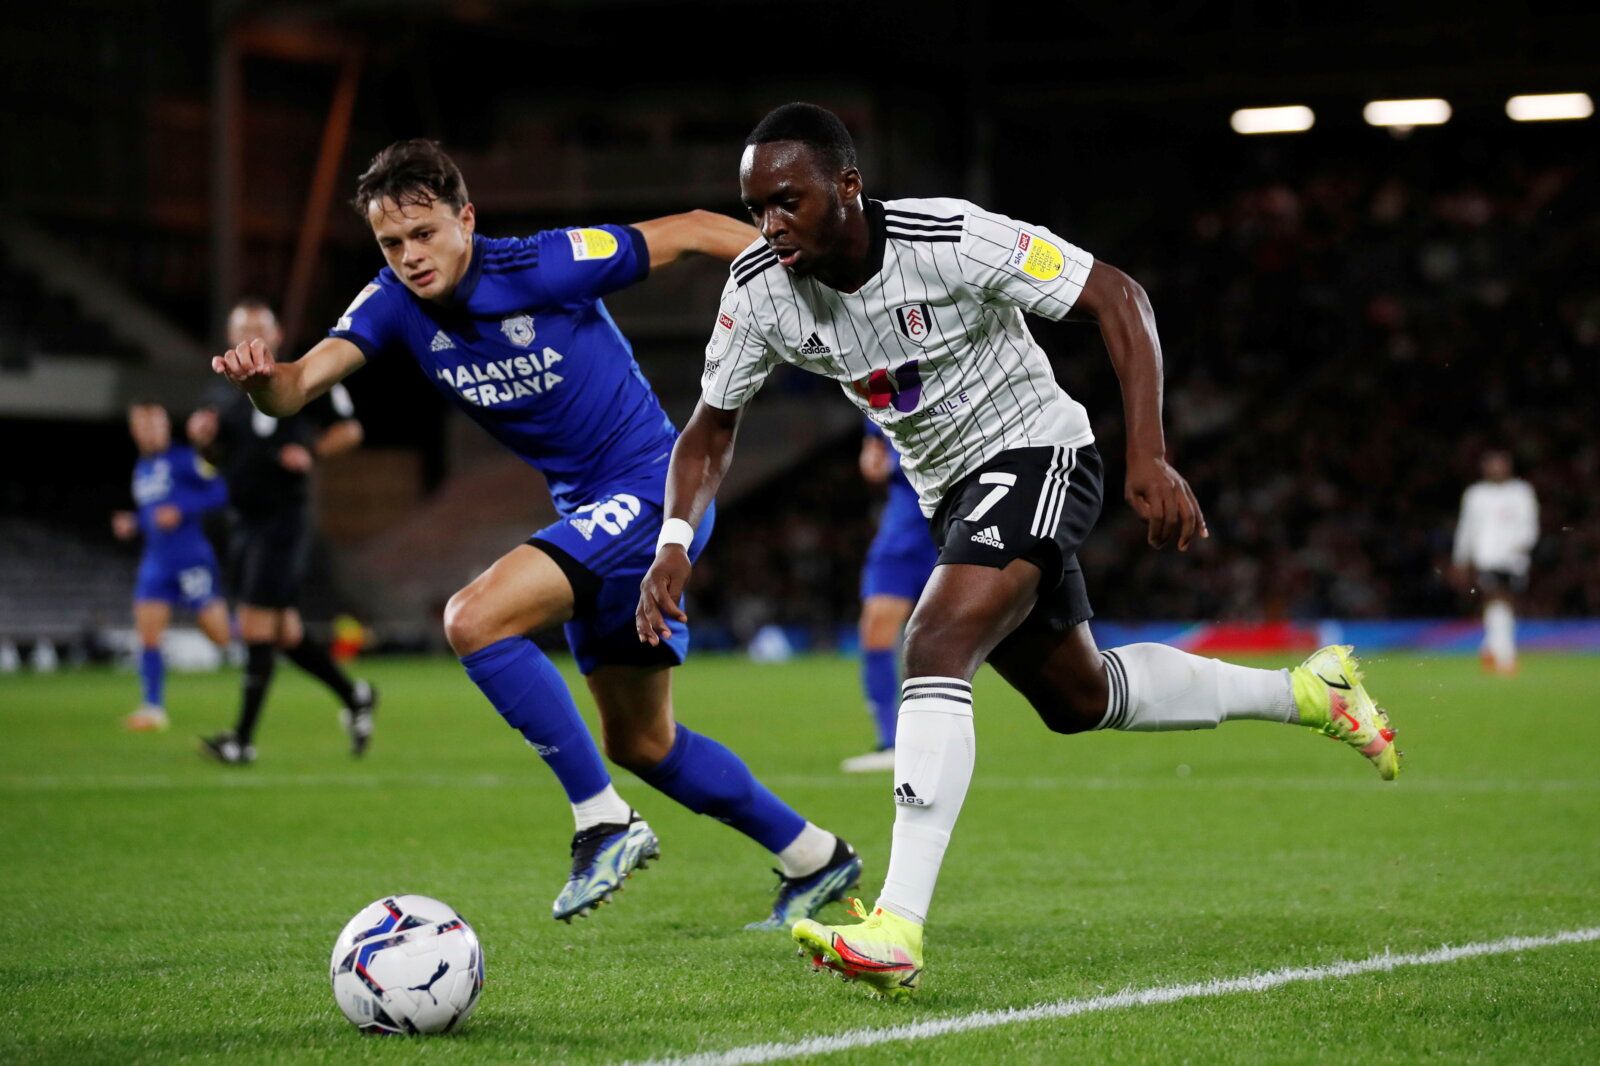 Soccer Football - Championship - Fulham v Cardiff City - Craven Cottage, London, Britain - October 20, 2021 Fulham’s Neeskens Kebano in action with Cardiff City’s Perry Ng   Action Images/Peter Cziborra  EDITORIAL USE ONLY. No use with unauthorized audio, video, data, fixture lists, club/league logos or 